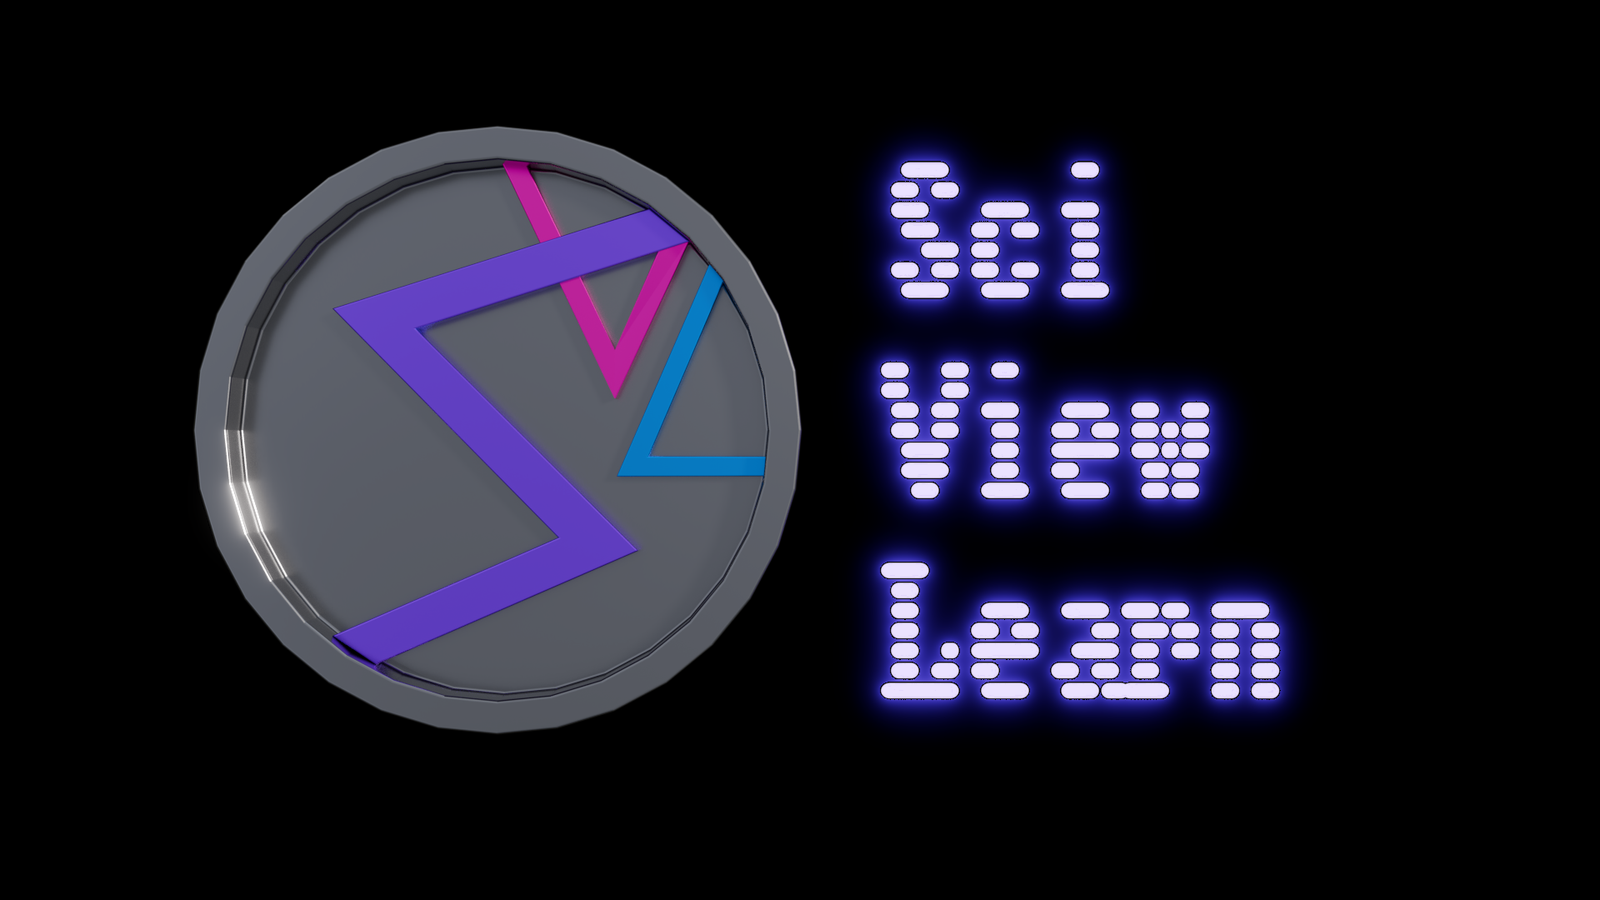 Sci ViewLearn | Games, stories and visuals for science education